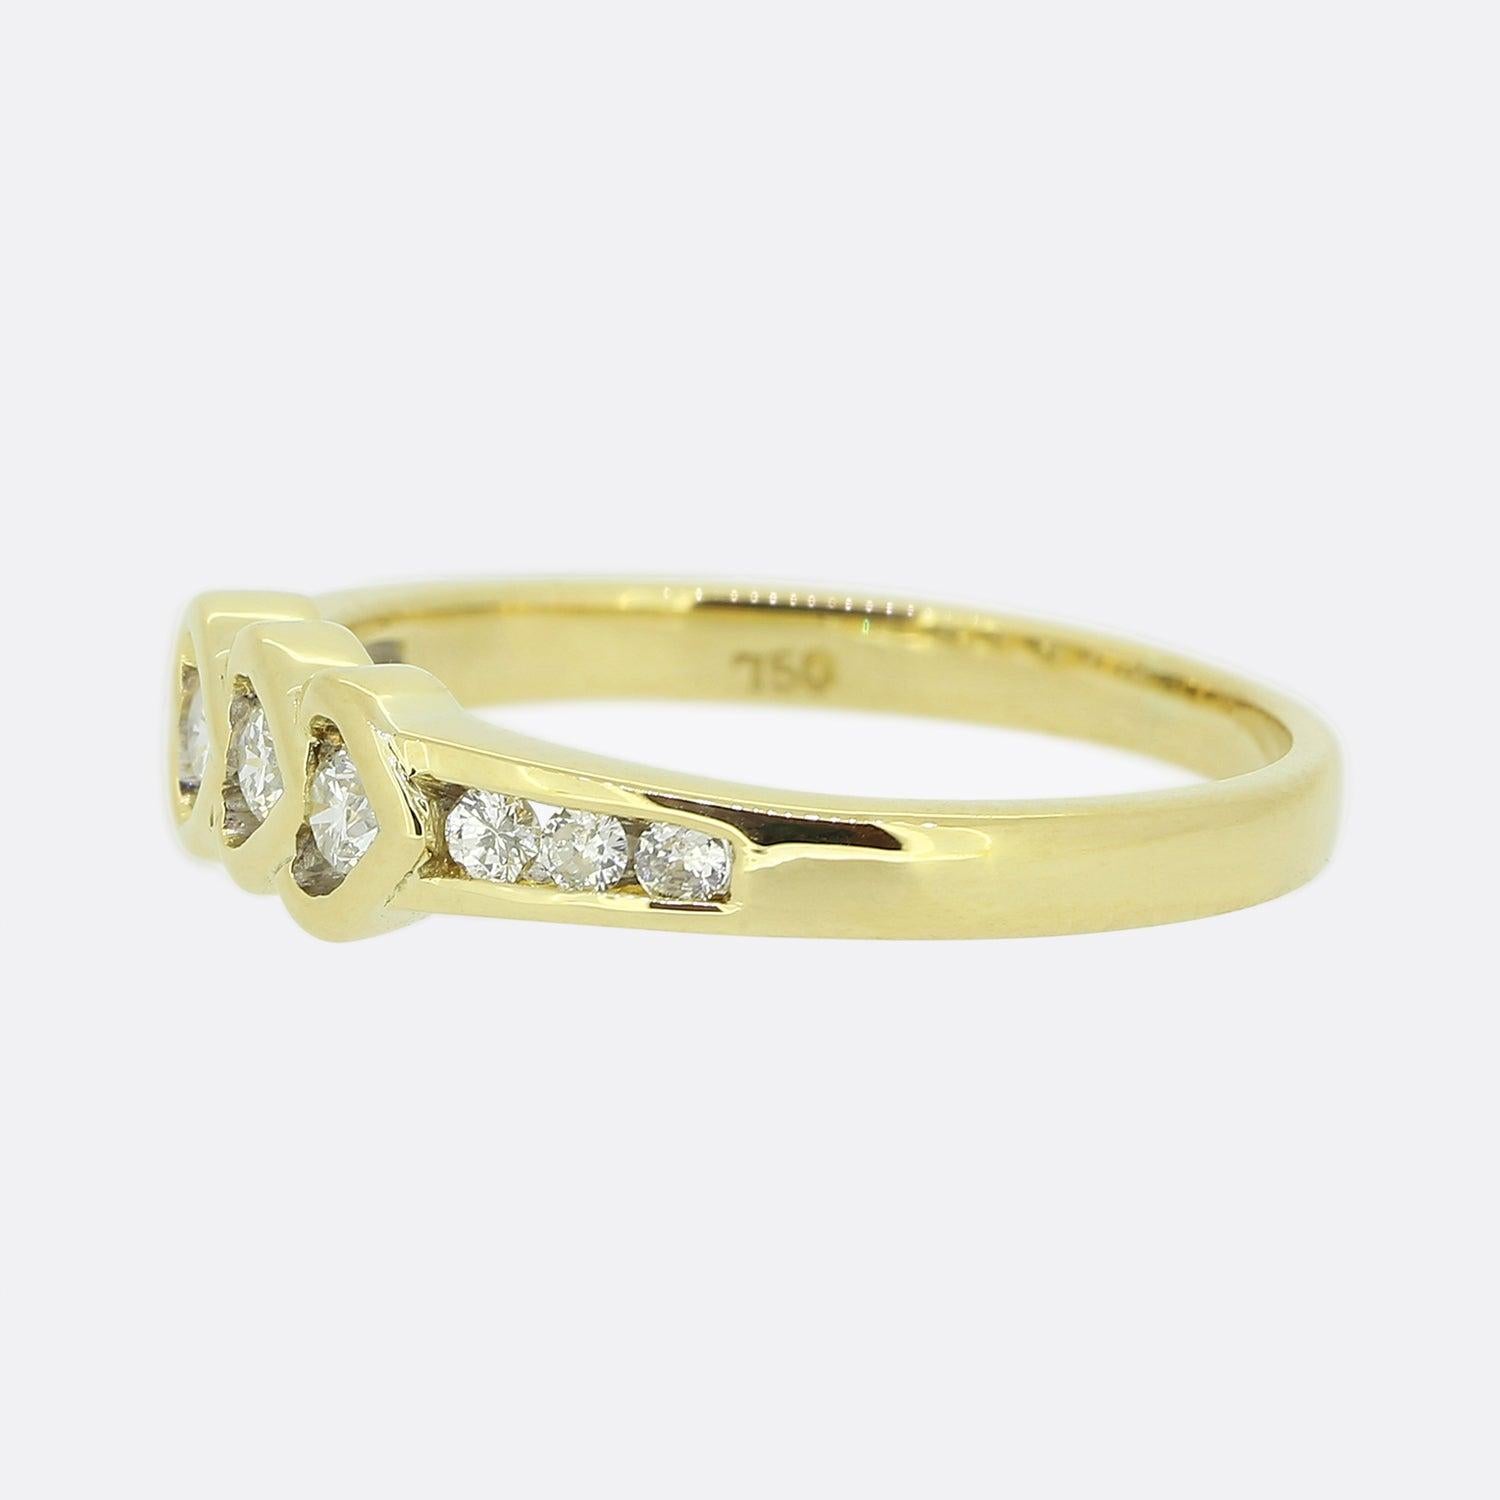 Here we have a wonderful diamond ring evoking feelings of love and affection. This piece has been crafted from 18ct yellow gold and showcases a trio of open heart motifs at the centre of the face; each of which has been individually set with a round